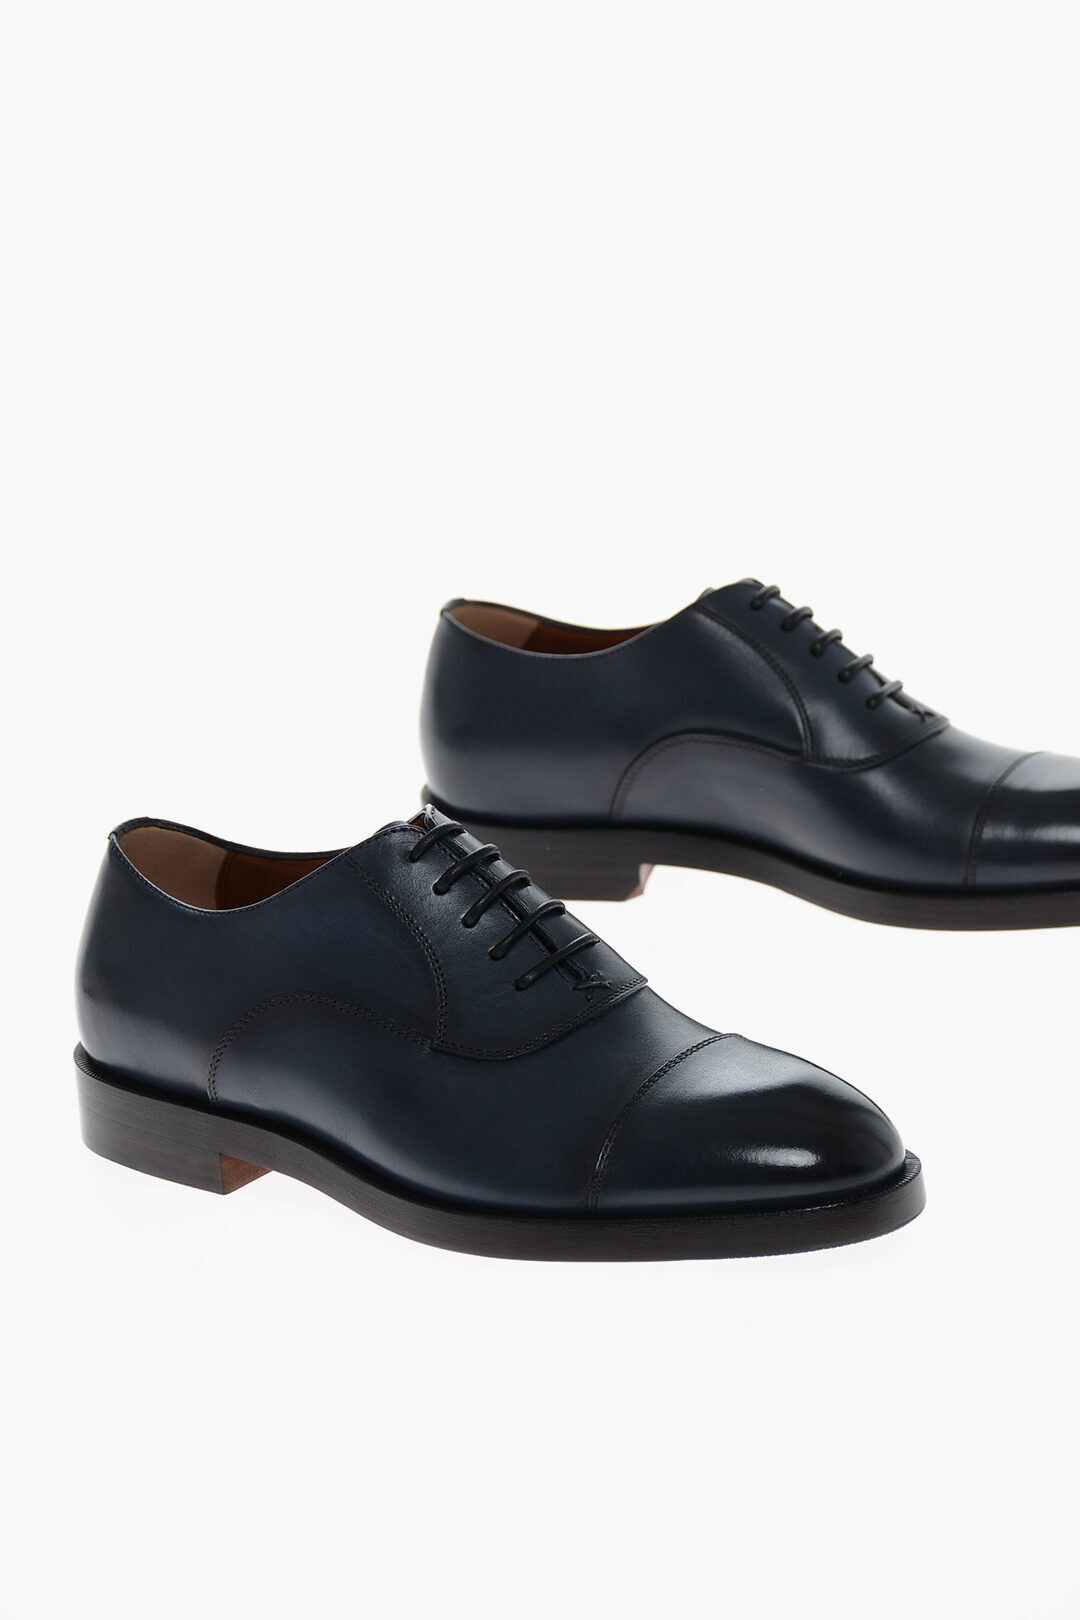 ZEGNA ゼニア ドレスシューズ LHCLG A5683Z TRB メンズ LEATHER TORINO OXFORD SHOES 【関税 送料無料】【ラッピング無料】 dk